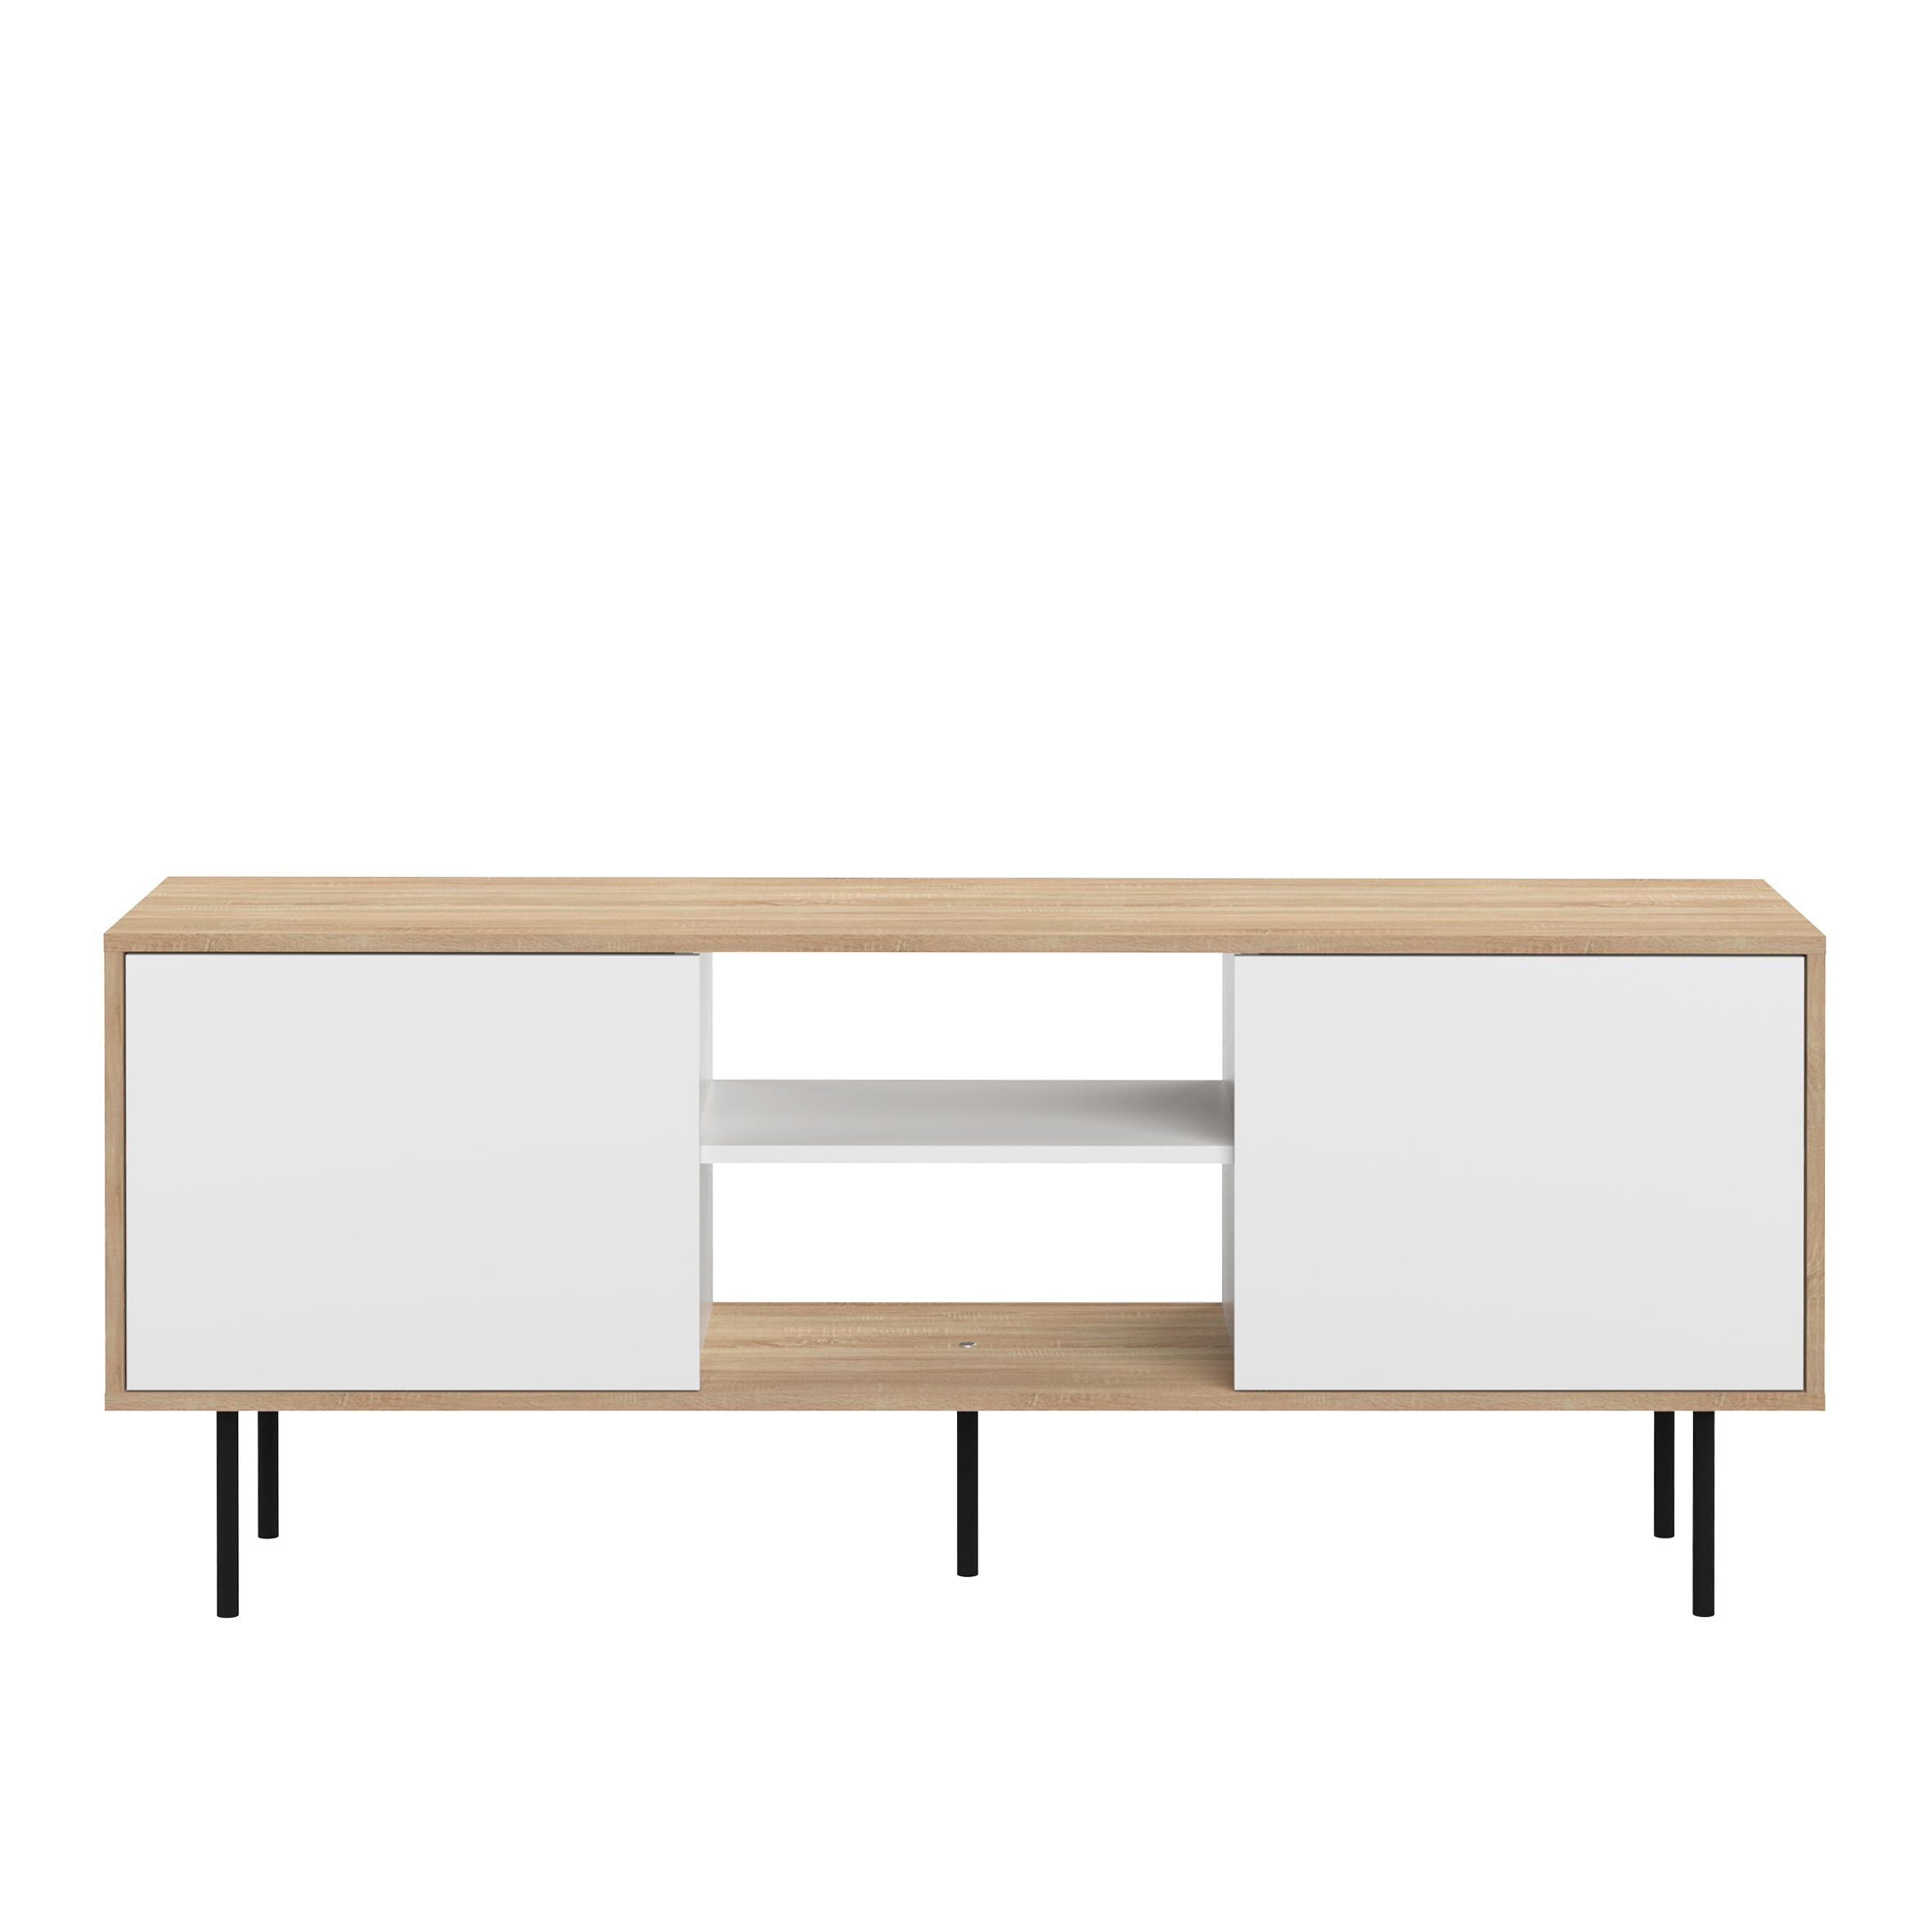 Altitude TV Stand Natural Oak/White by Temahome